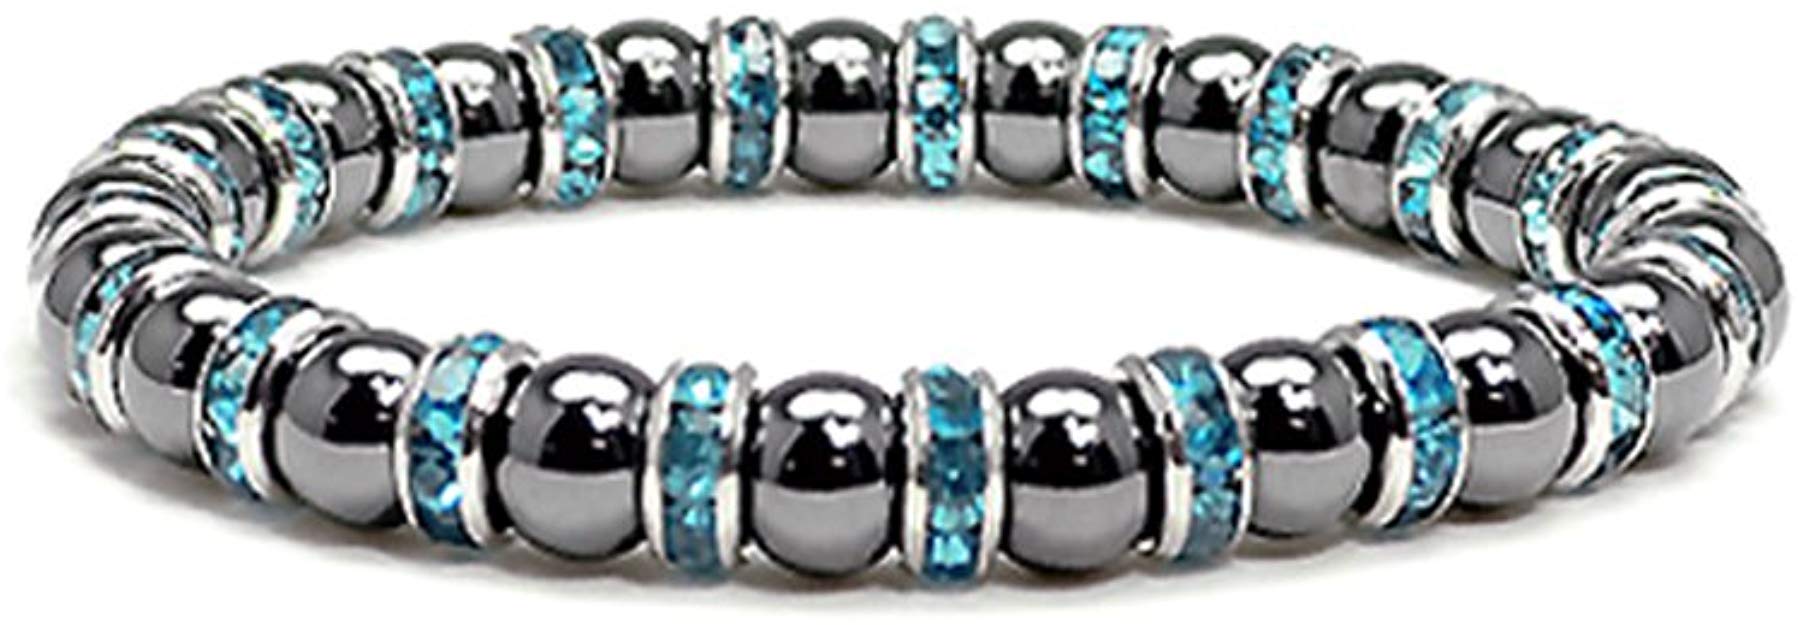 Accents Kingdom Magnetic Bracelet Women's Tuchi Simulated Pearl Hematite Magnetic Therapy Bracelet